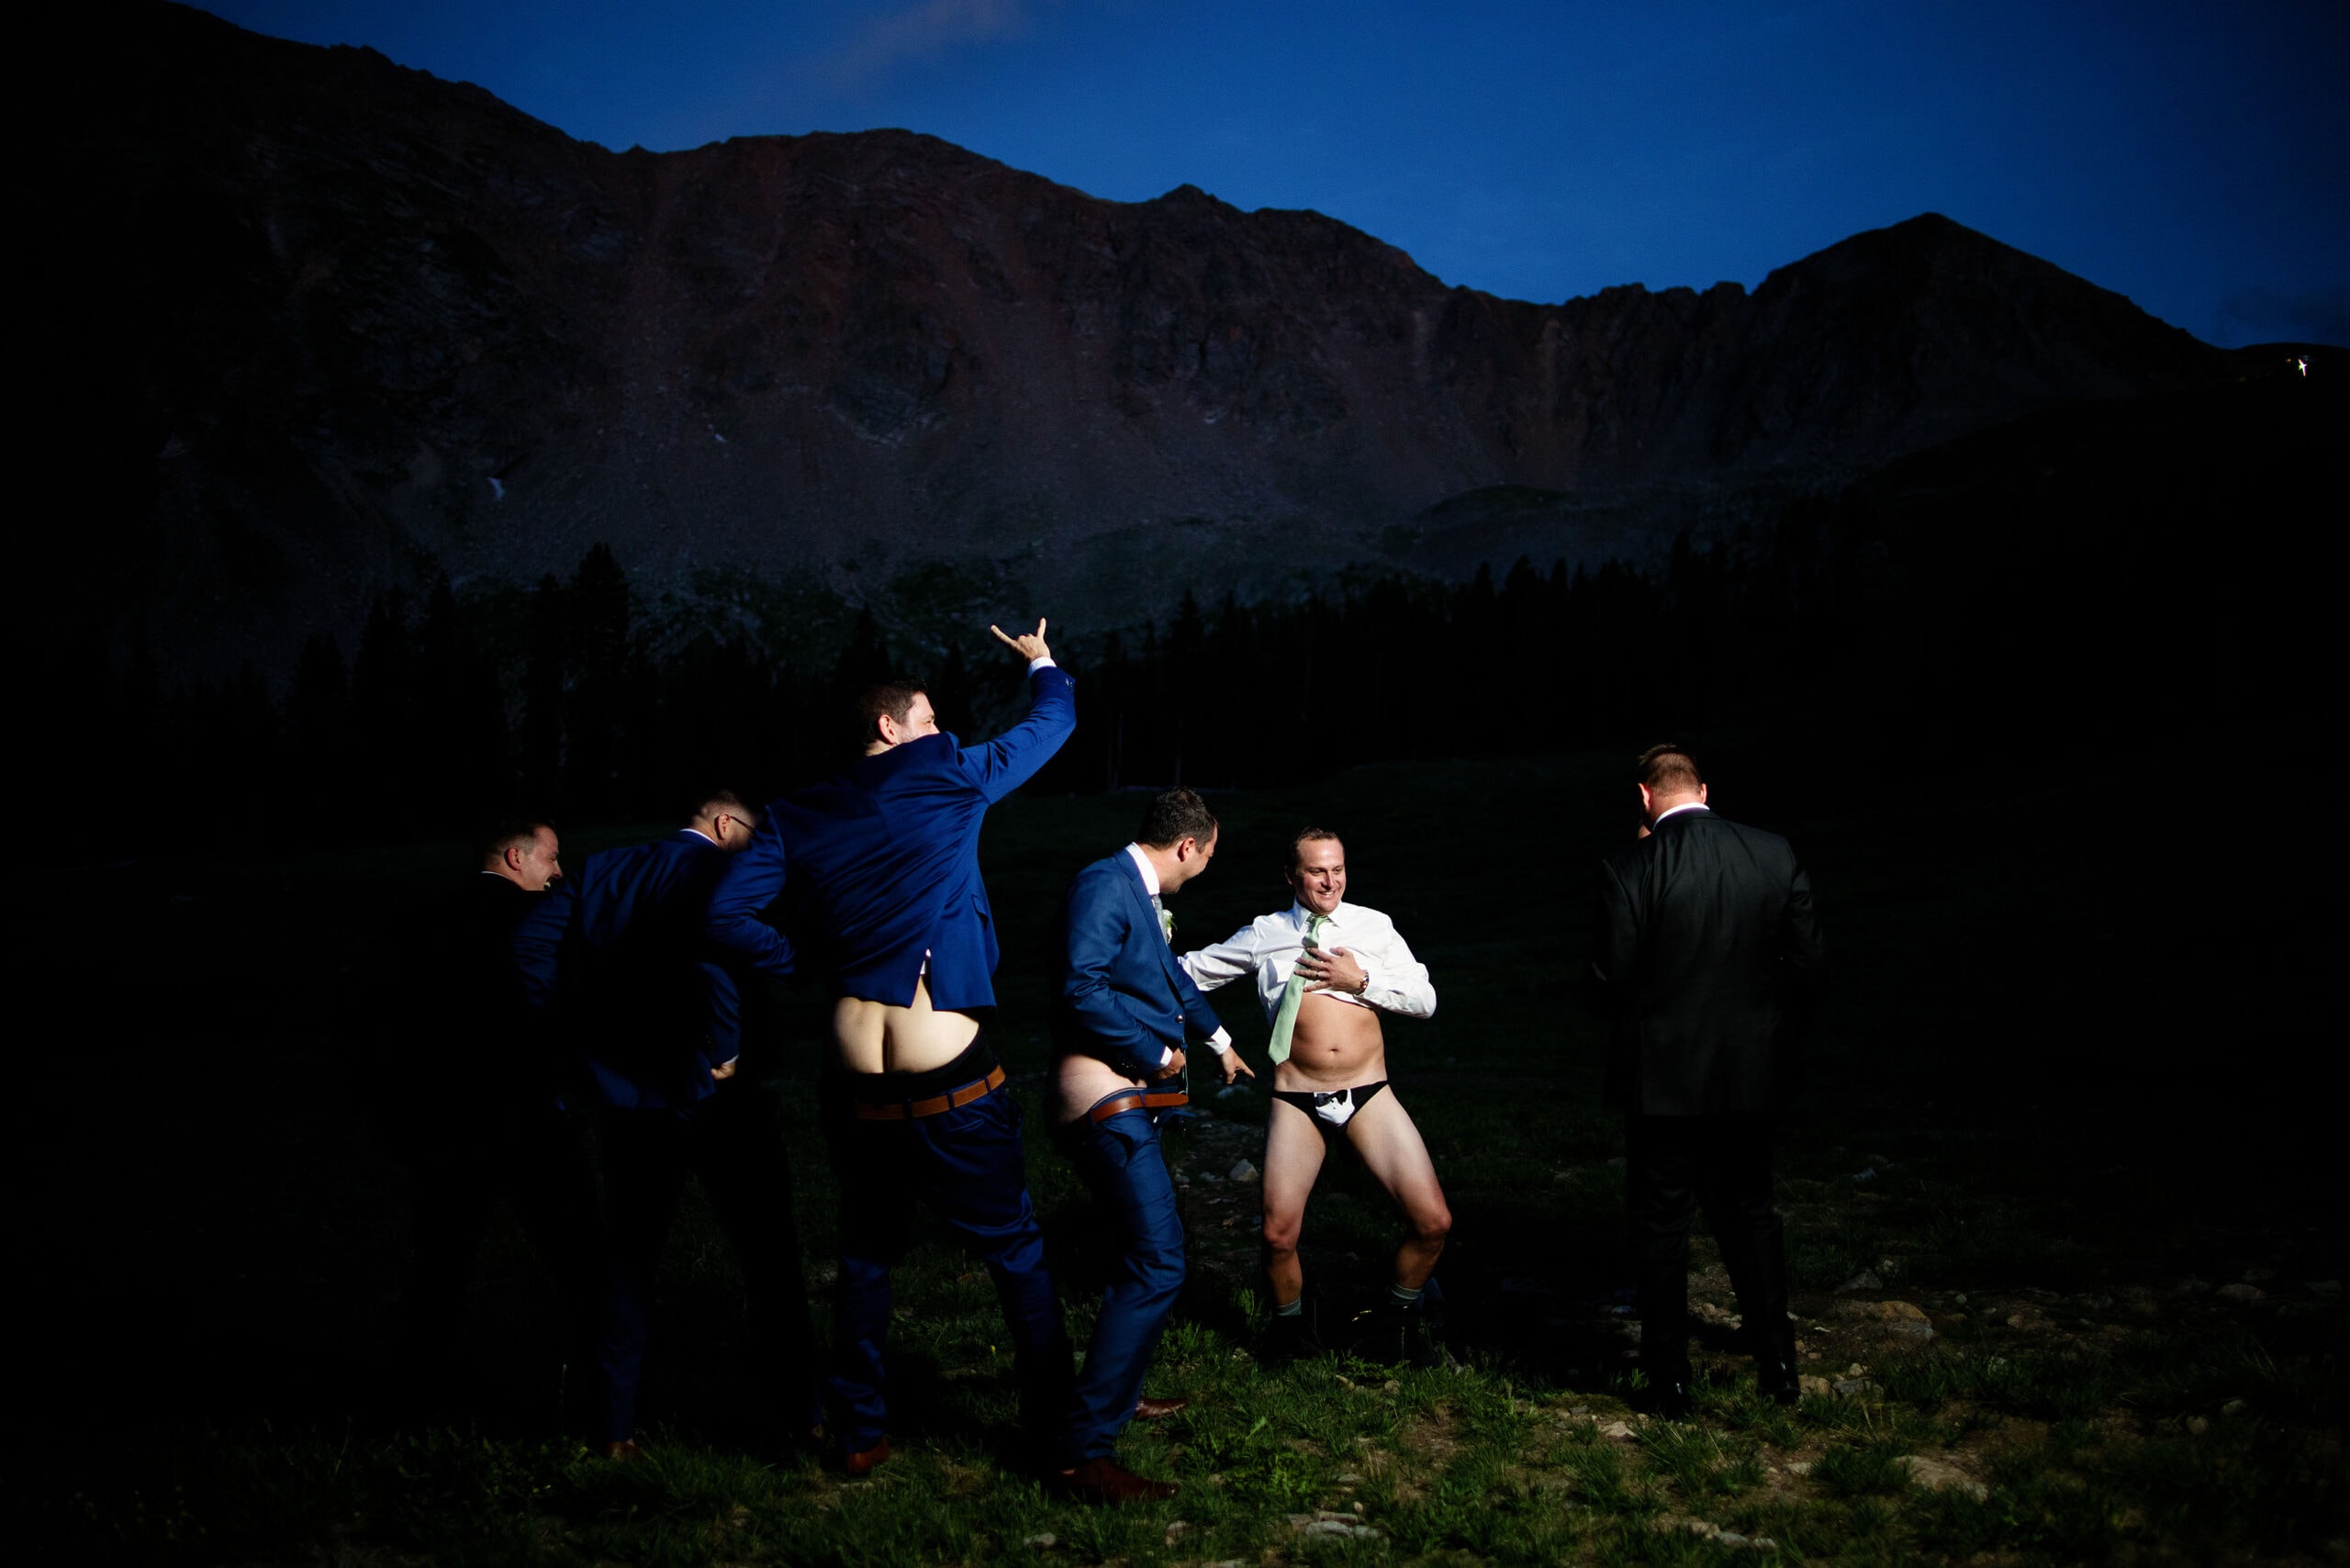 Groomsmen pose for a partially nude photo and laugh together during twilight at Arapahoe Basin